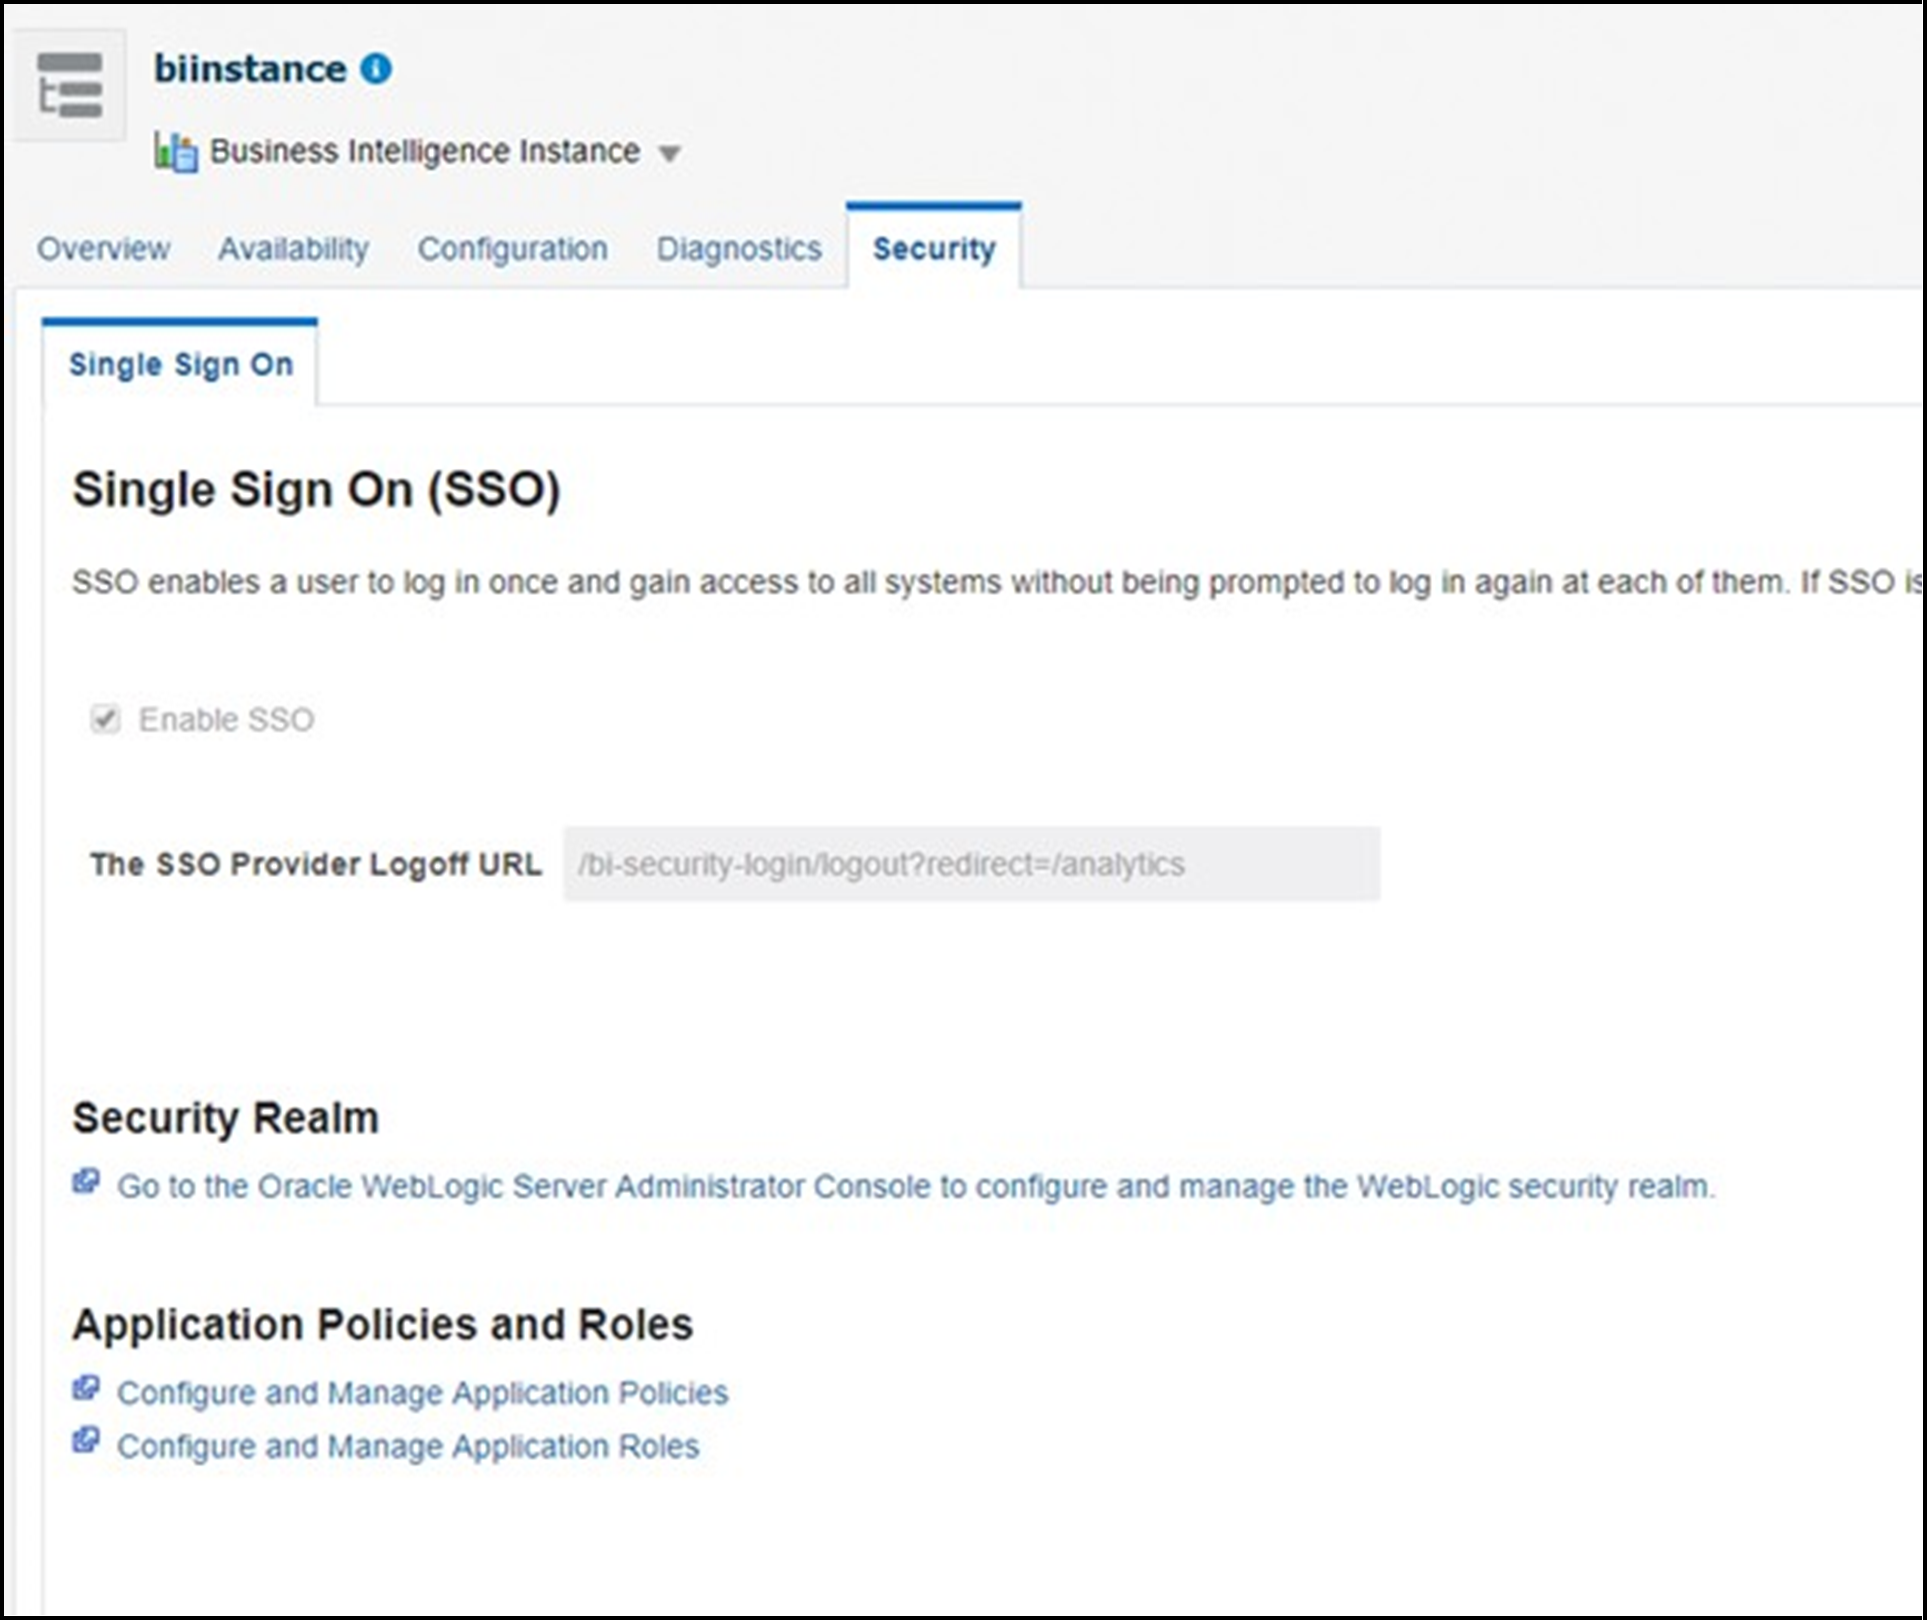 The security tab in the biibstance screen allows you to configure and manage the application roles.